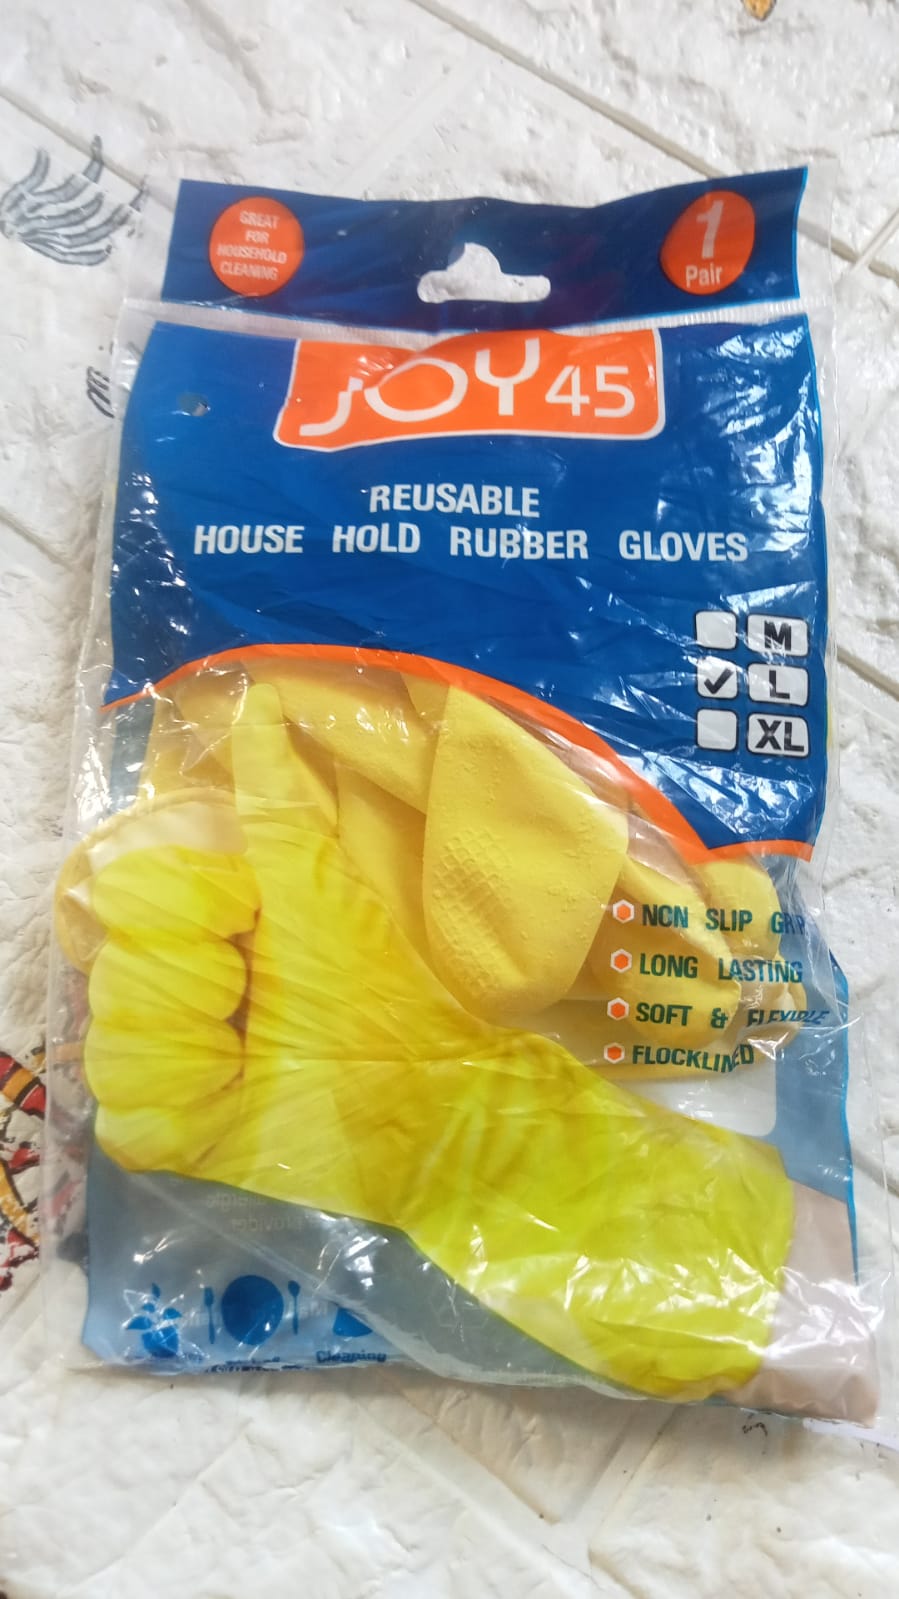 0679 Multipurpose Rubber Reusable Cleaning Gloves, Reusable Rubber Hand Gloves I Latex Safety Gloves I for Washing I Cleaning Kitchen I Gardening I Sanitation I Wet and Dry Use Gloves (1 Pair)